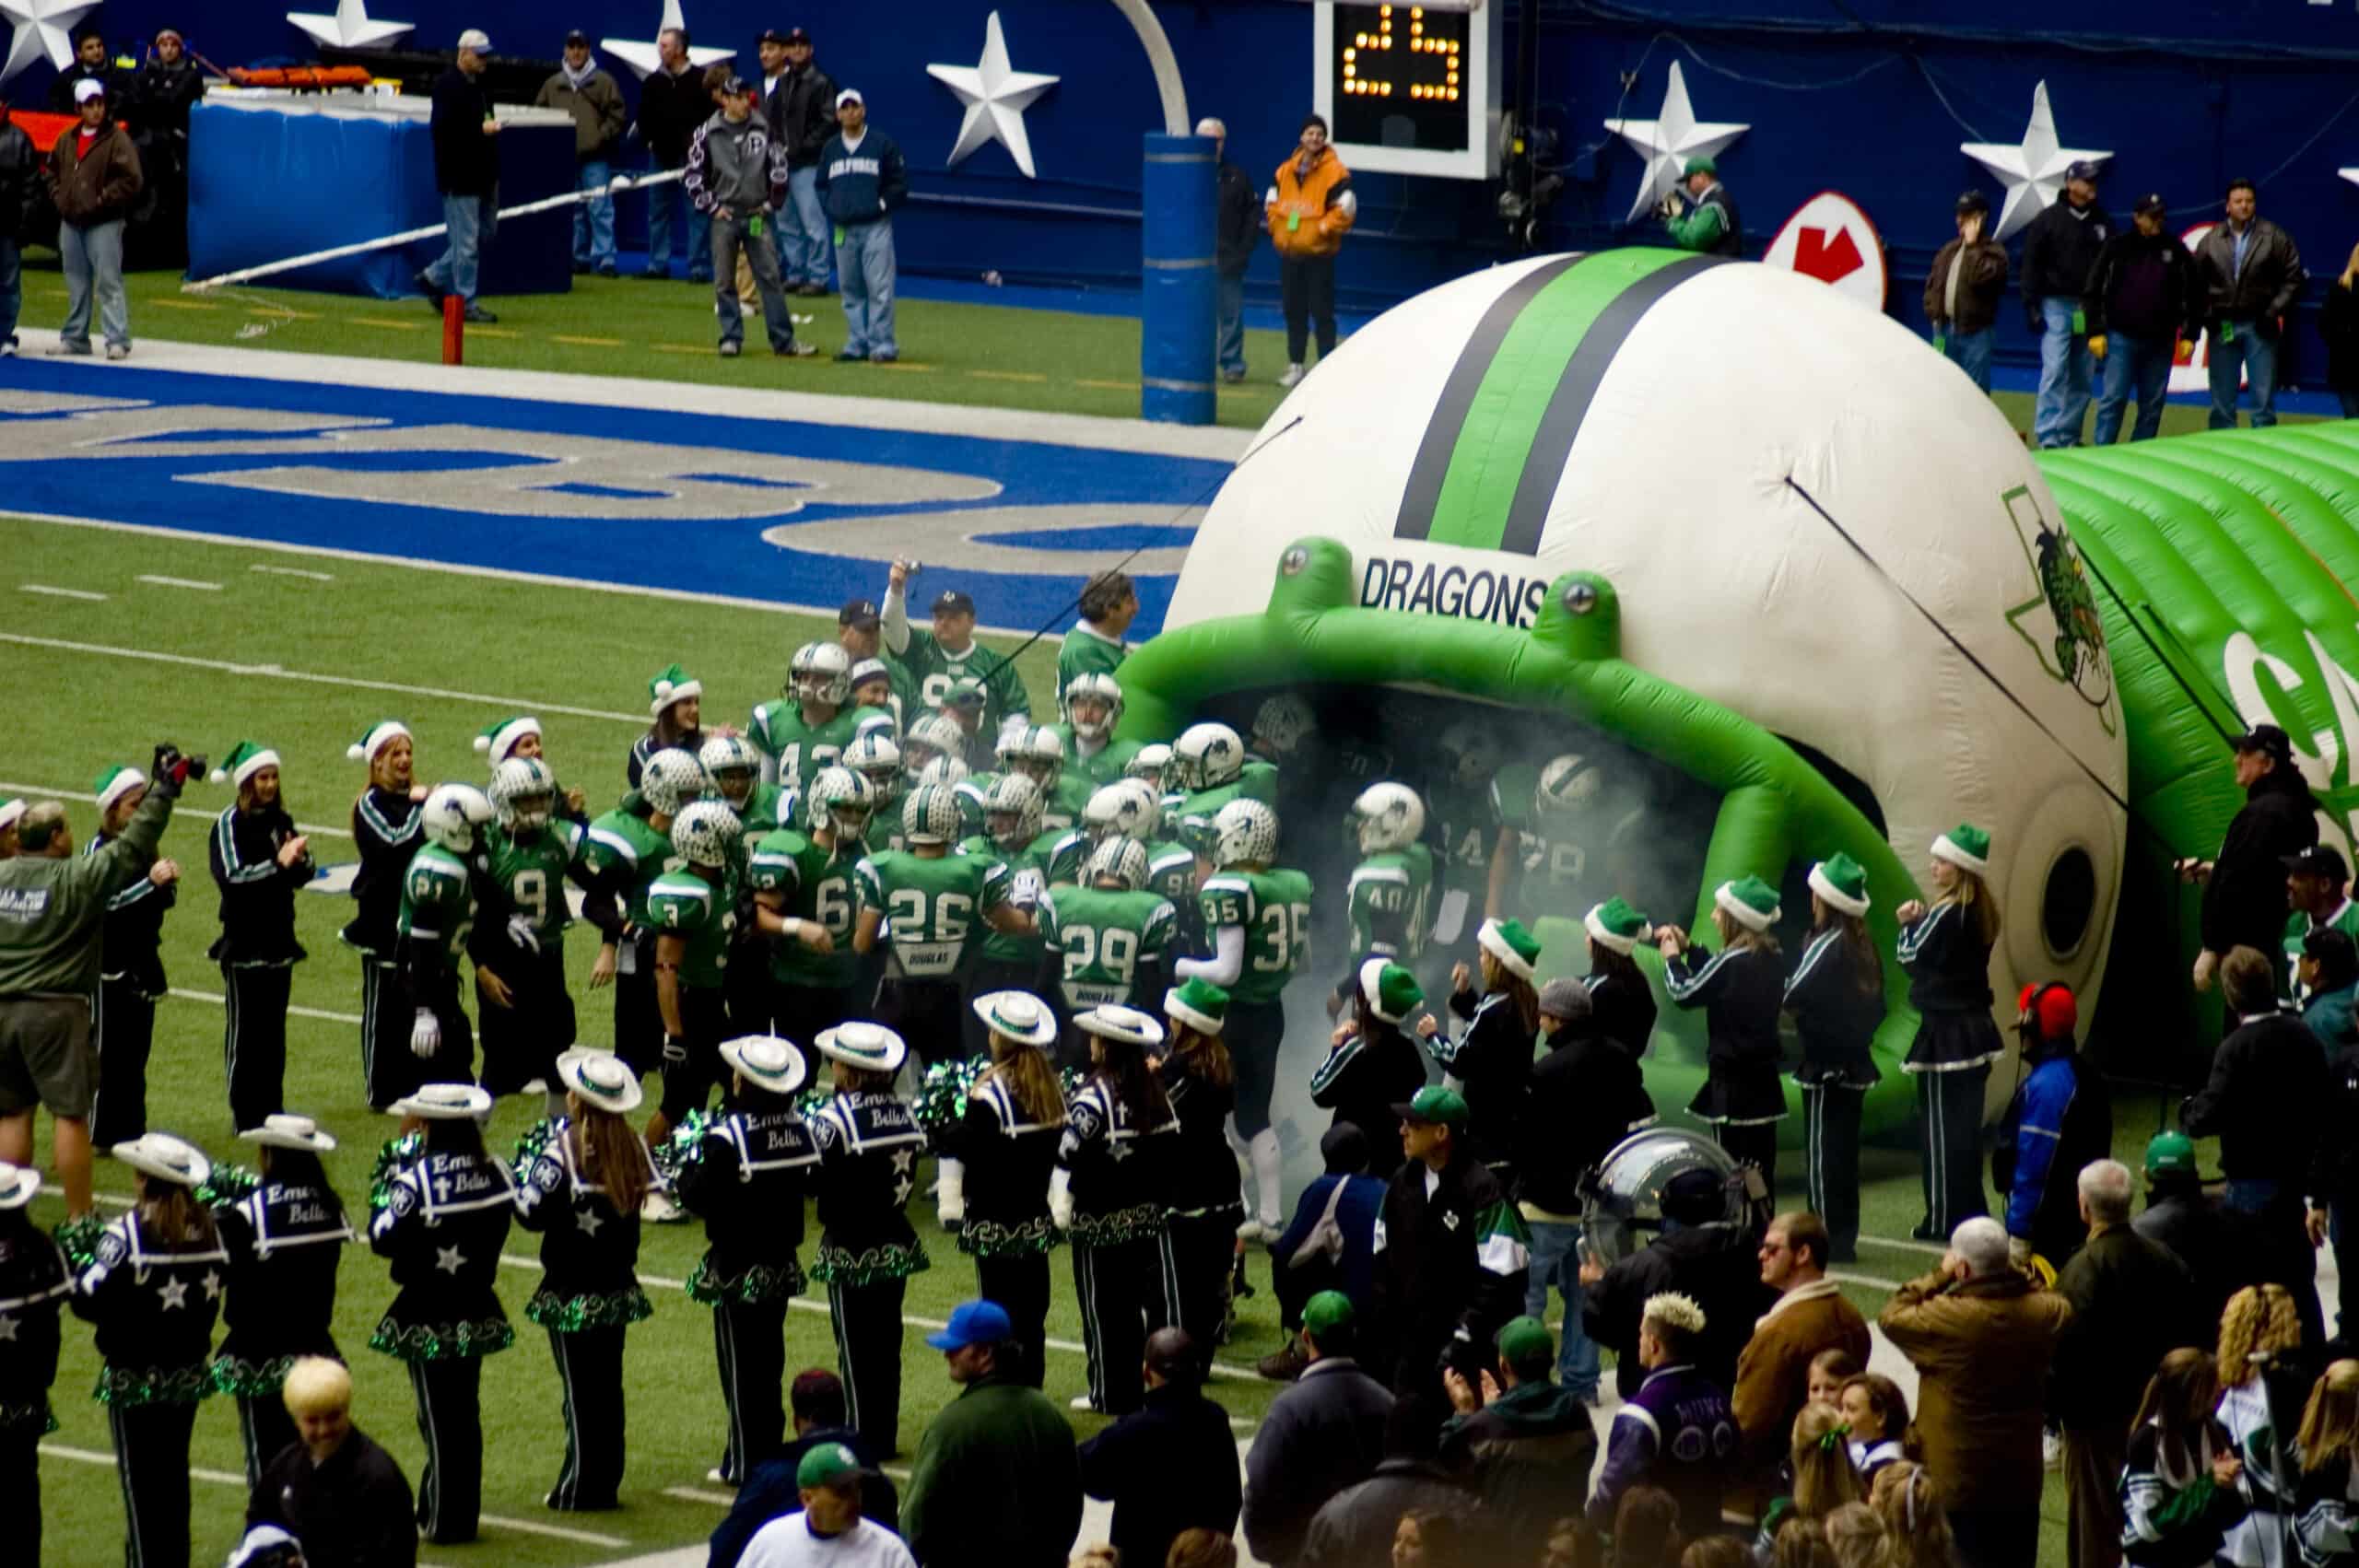 Southlakefootball by Philip Shoffner